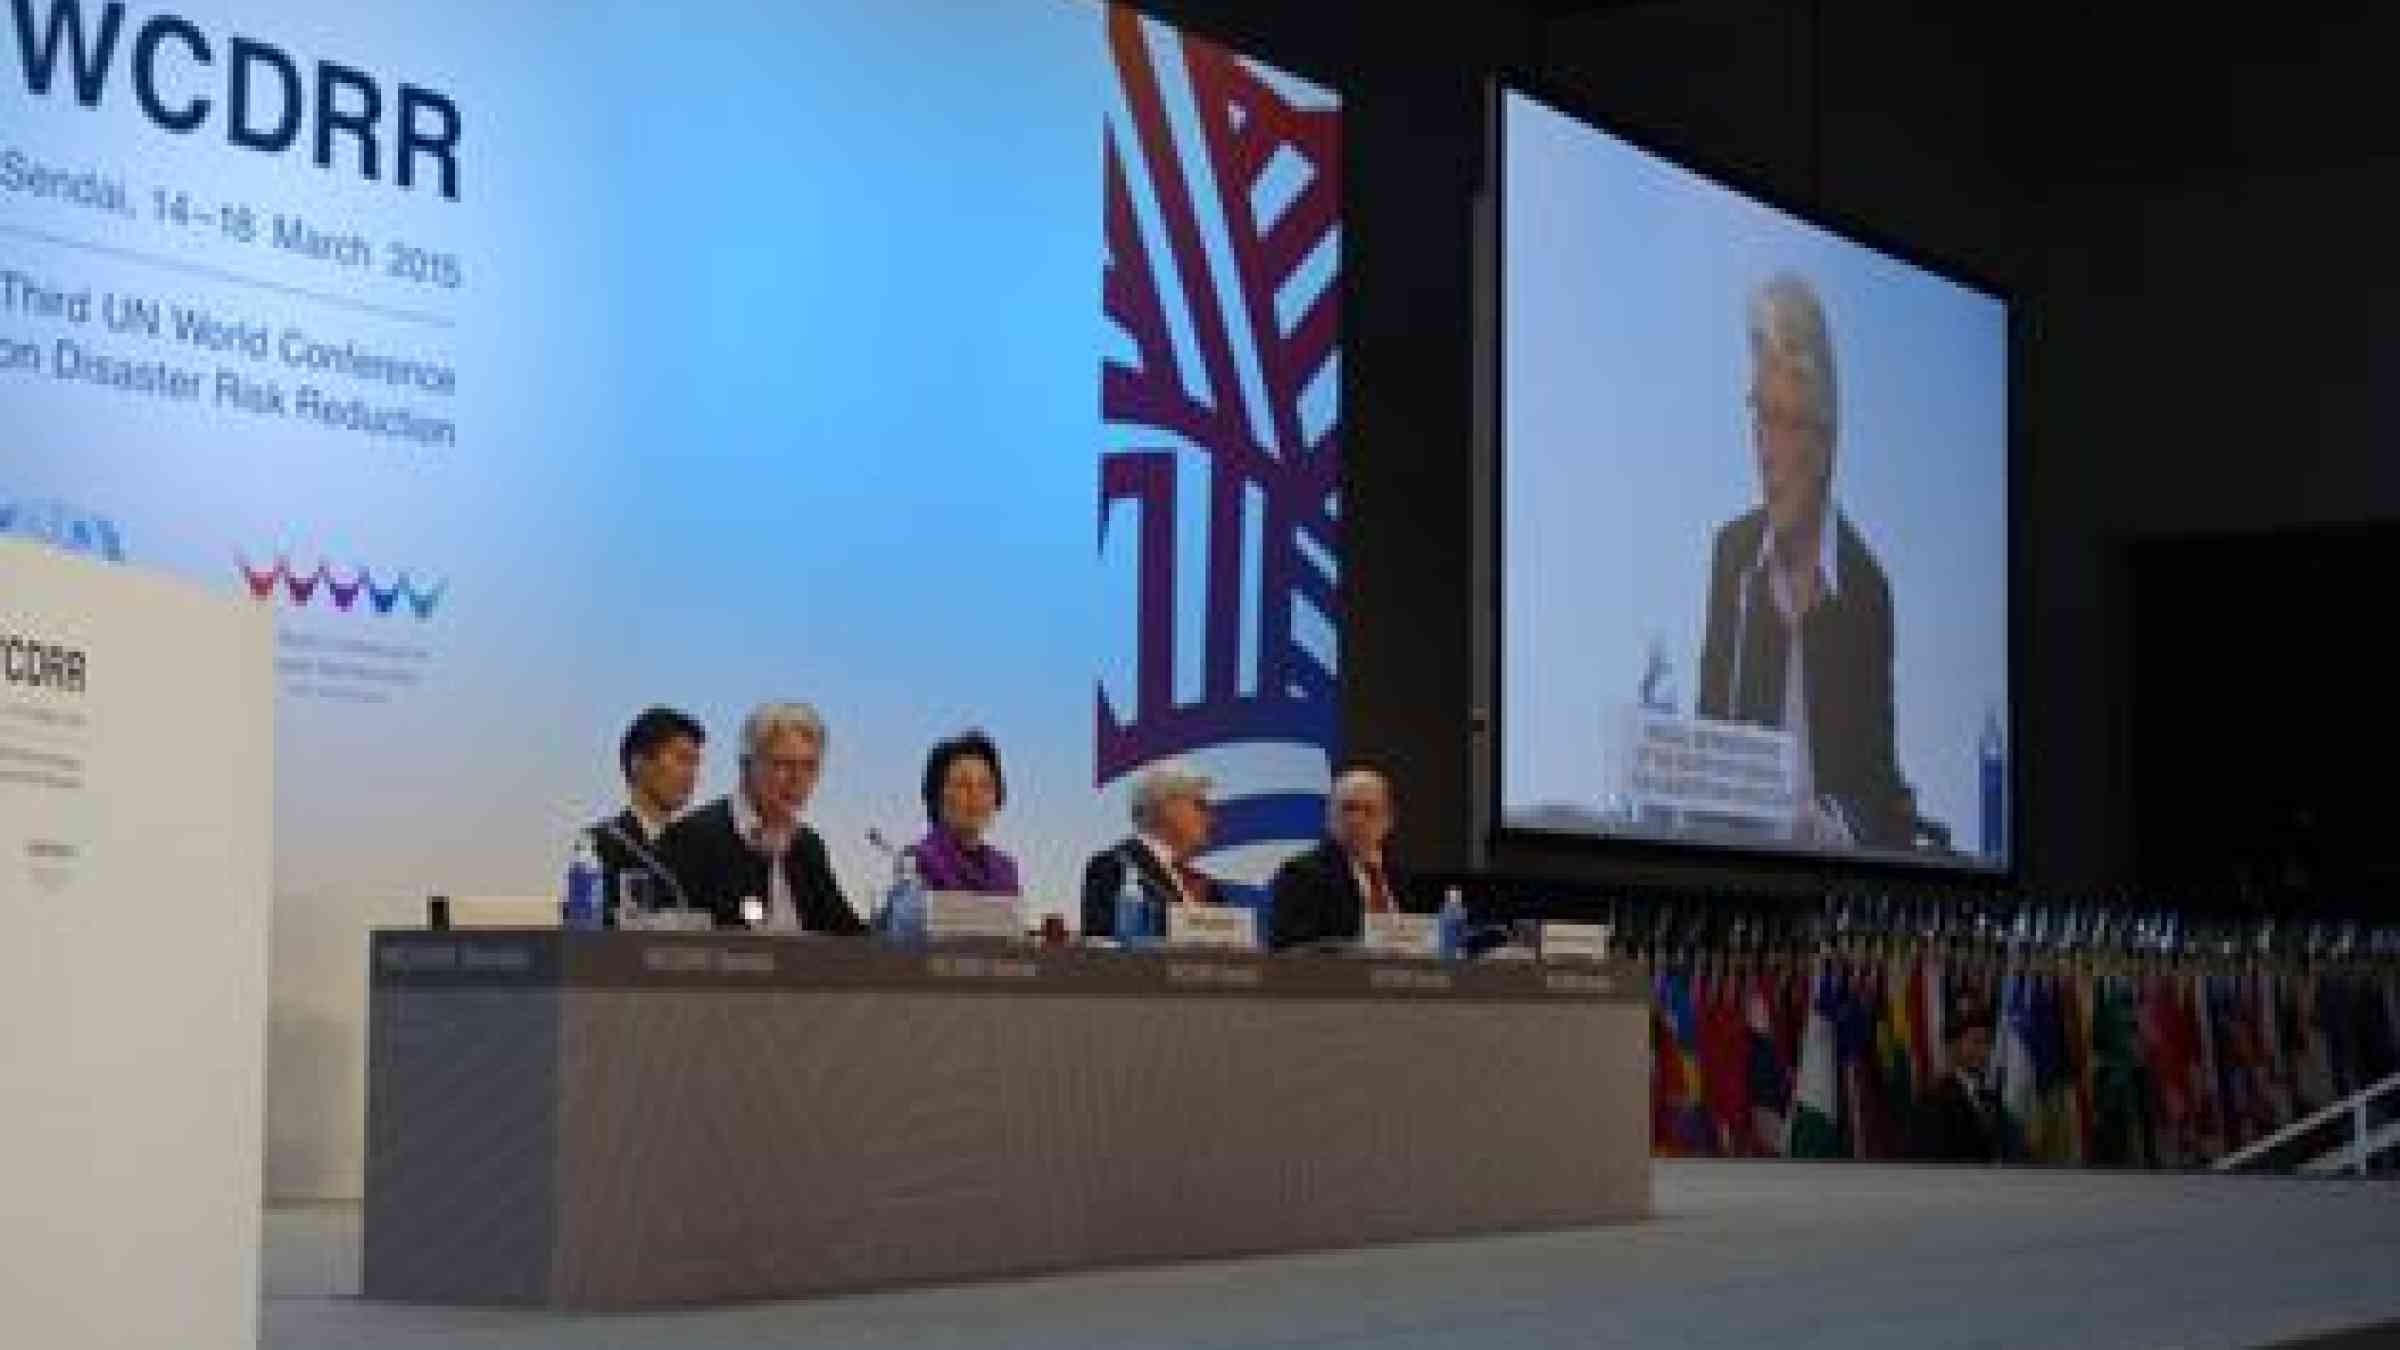 The closing plenary of the World Conference of Disaster Risk Reduction in Sendai, Japan. (Photo: UNISDR)